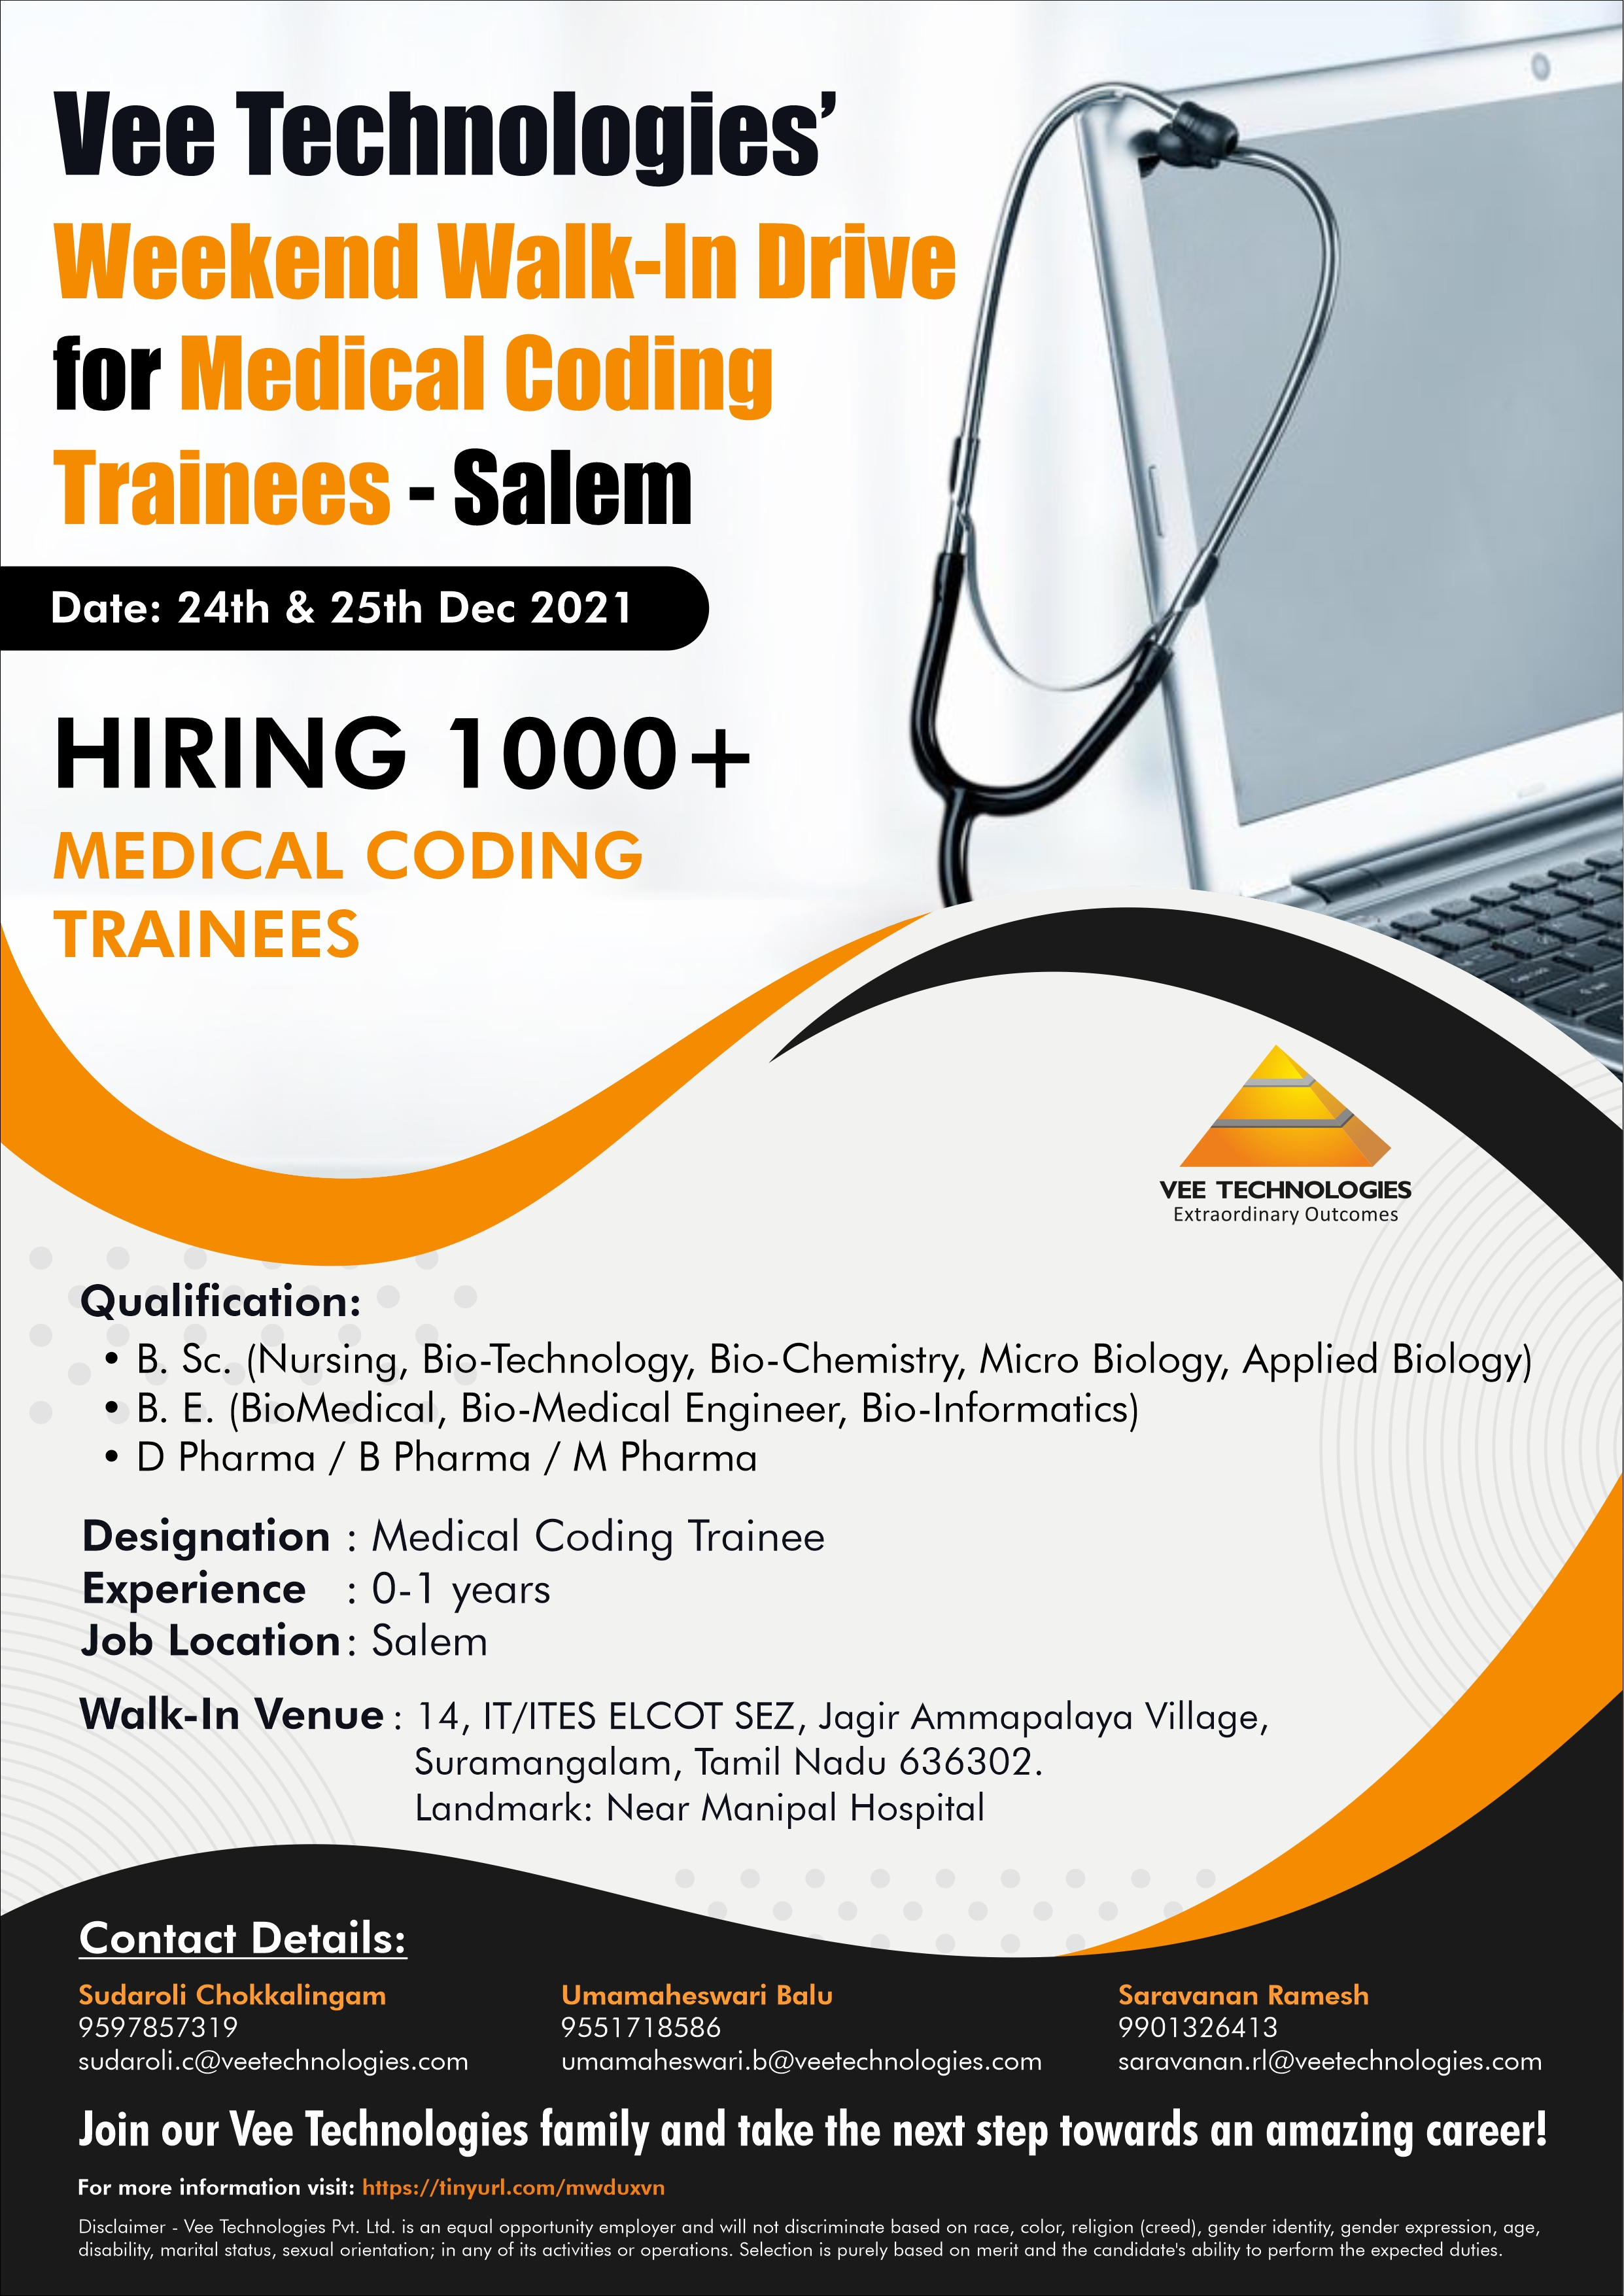 Vee Technologies’ Walk-In Drive for Medical Coding'